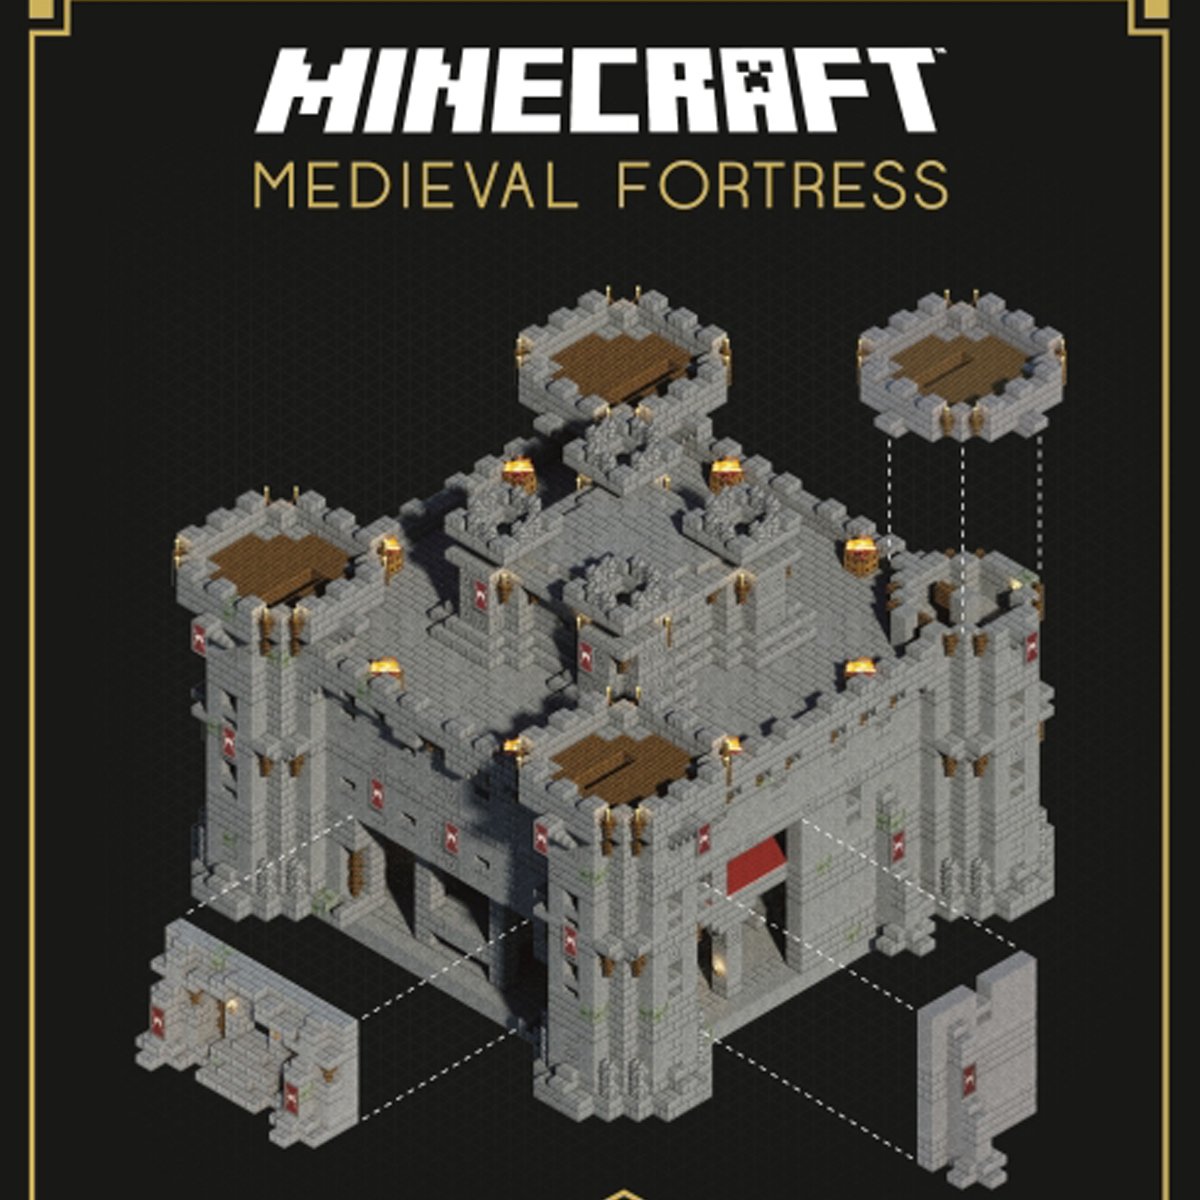 Wordery On Twitter Want To Build Your Own Throne Room Check Out This Official Minecraft Book By Mojang Https T Co Icigogwkix